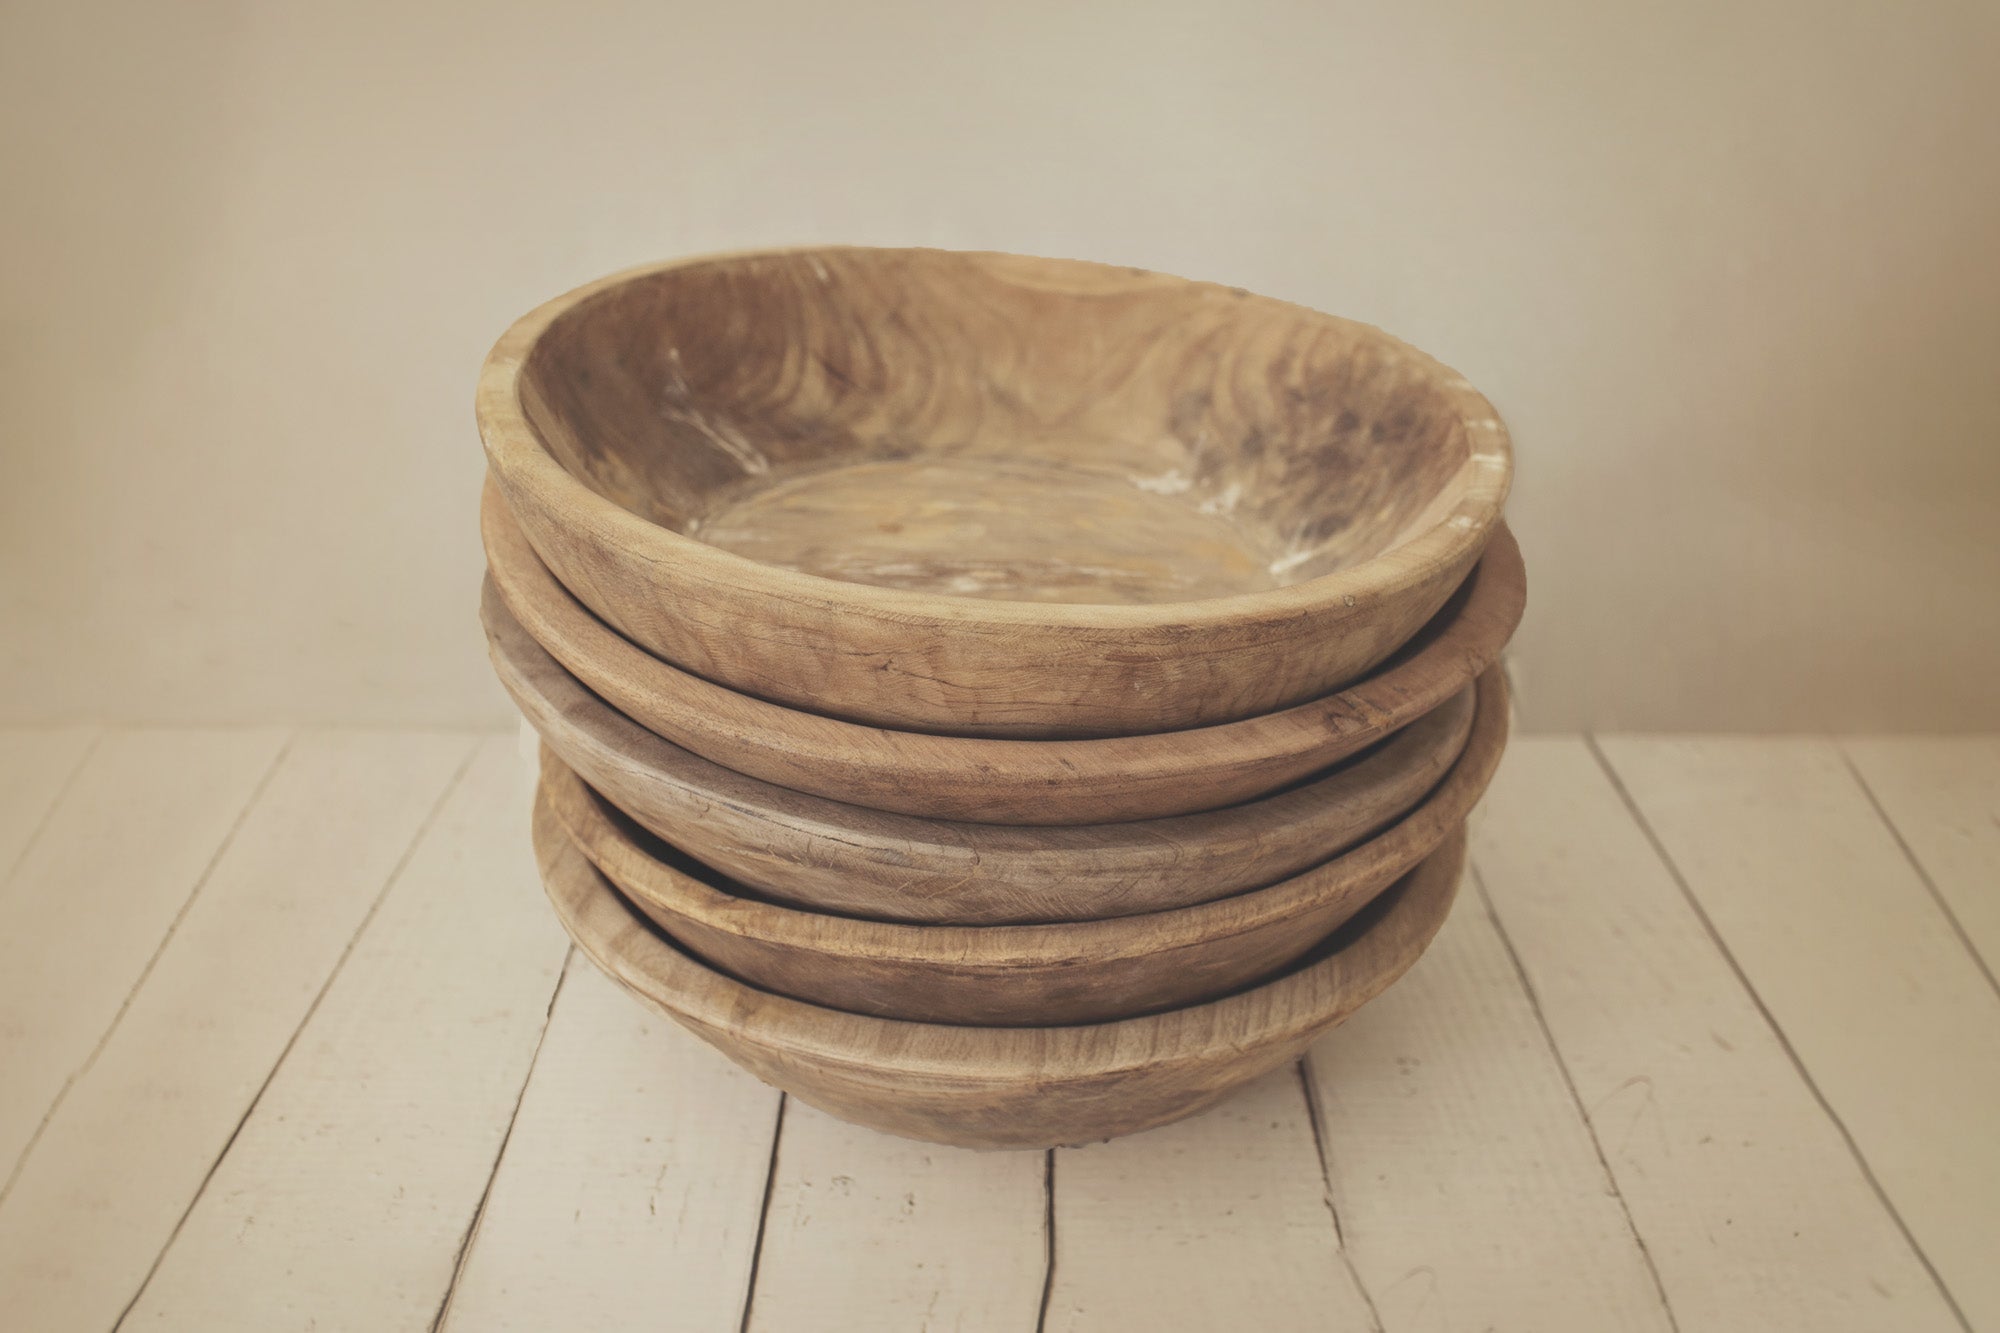 Natural Vintage Wooden Bowls - Small Size